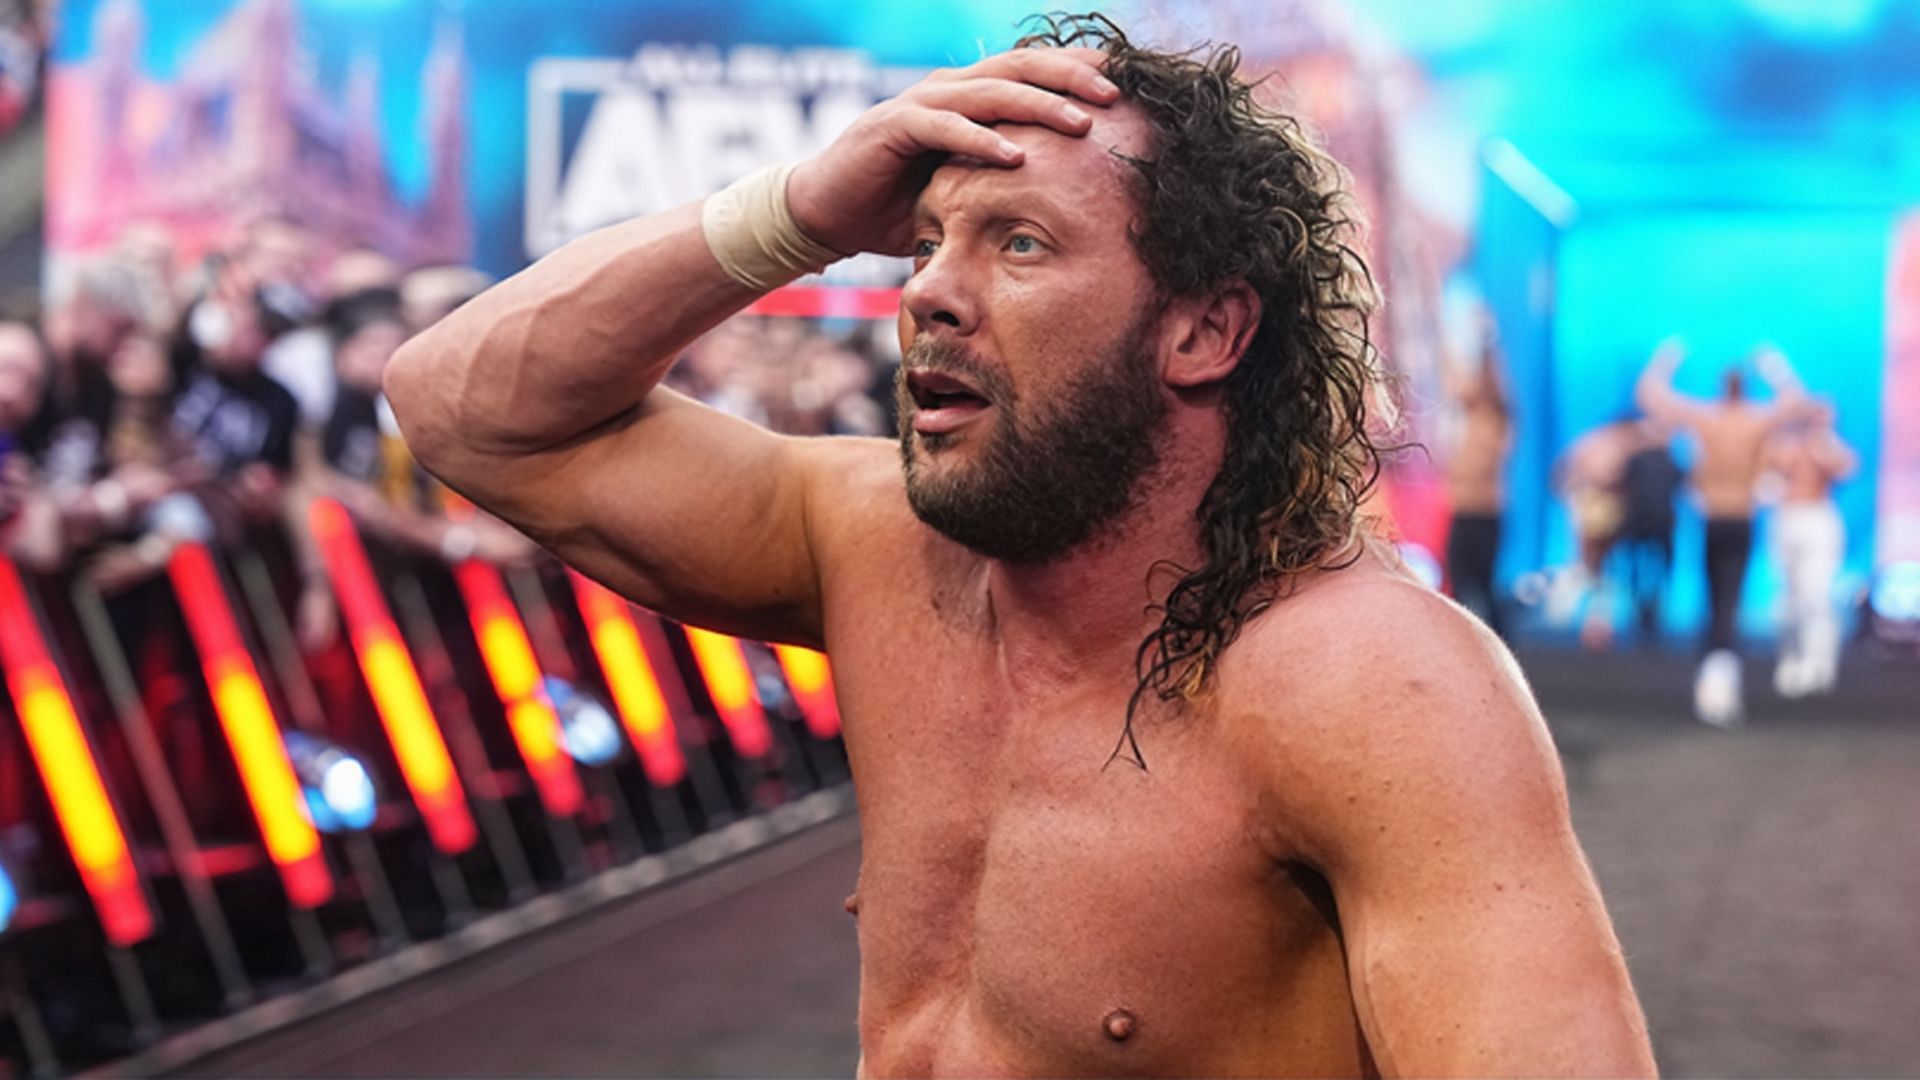 Kenny Omega recently announced that he is out indefinitely